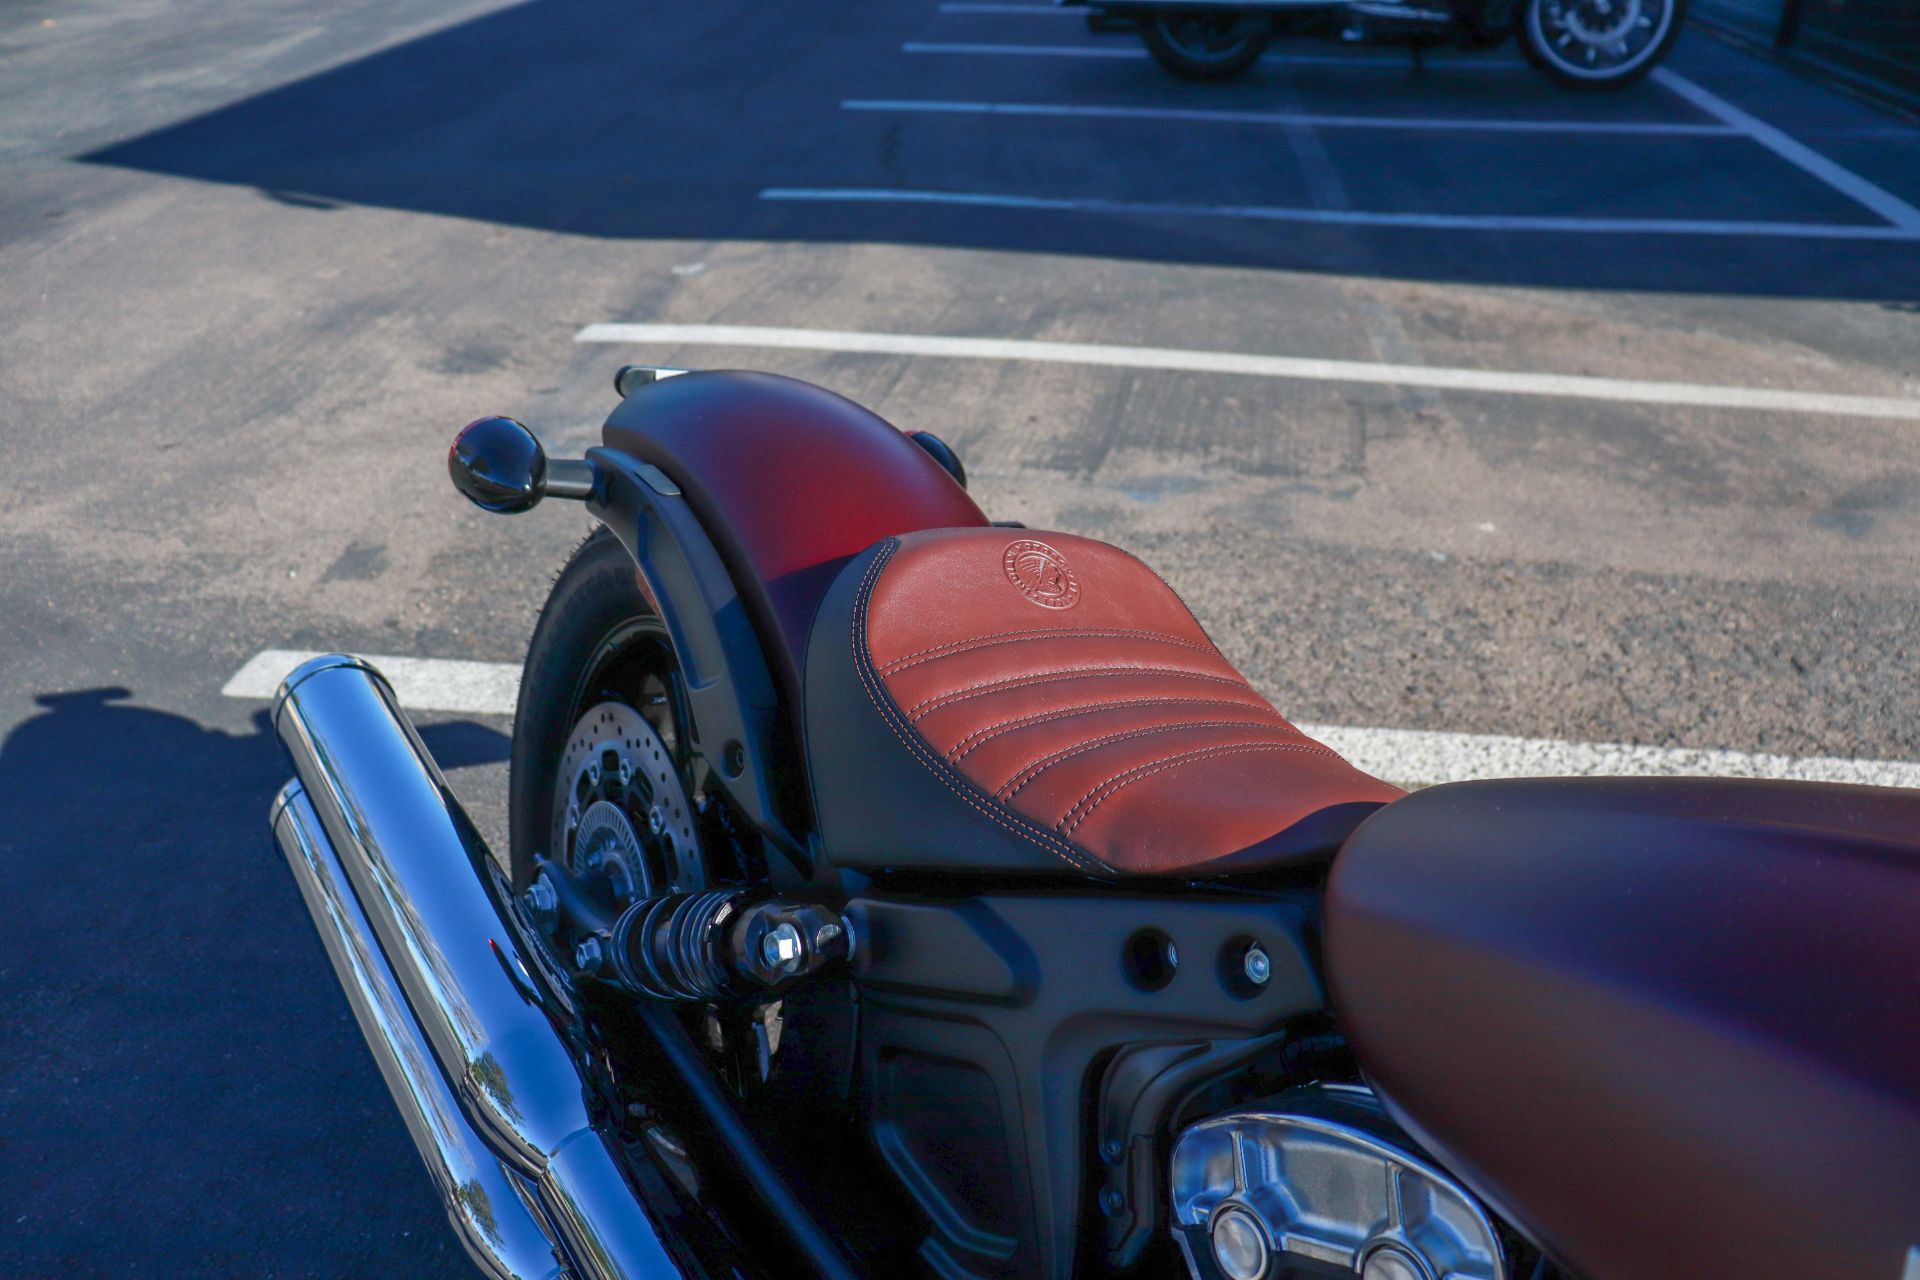 2022 Indian Scout® Bobber ABS in San Diego, California - Photo 3